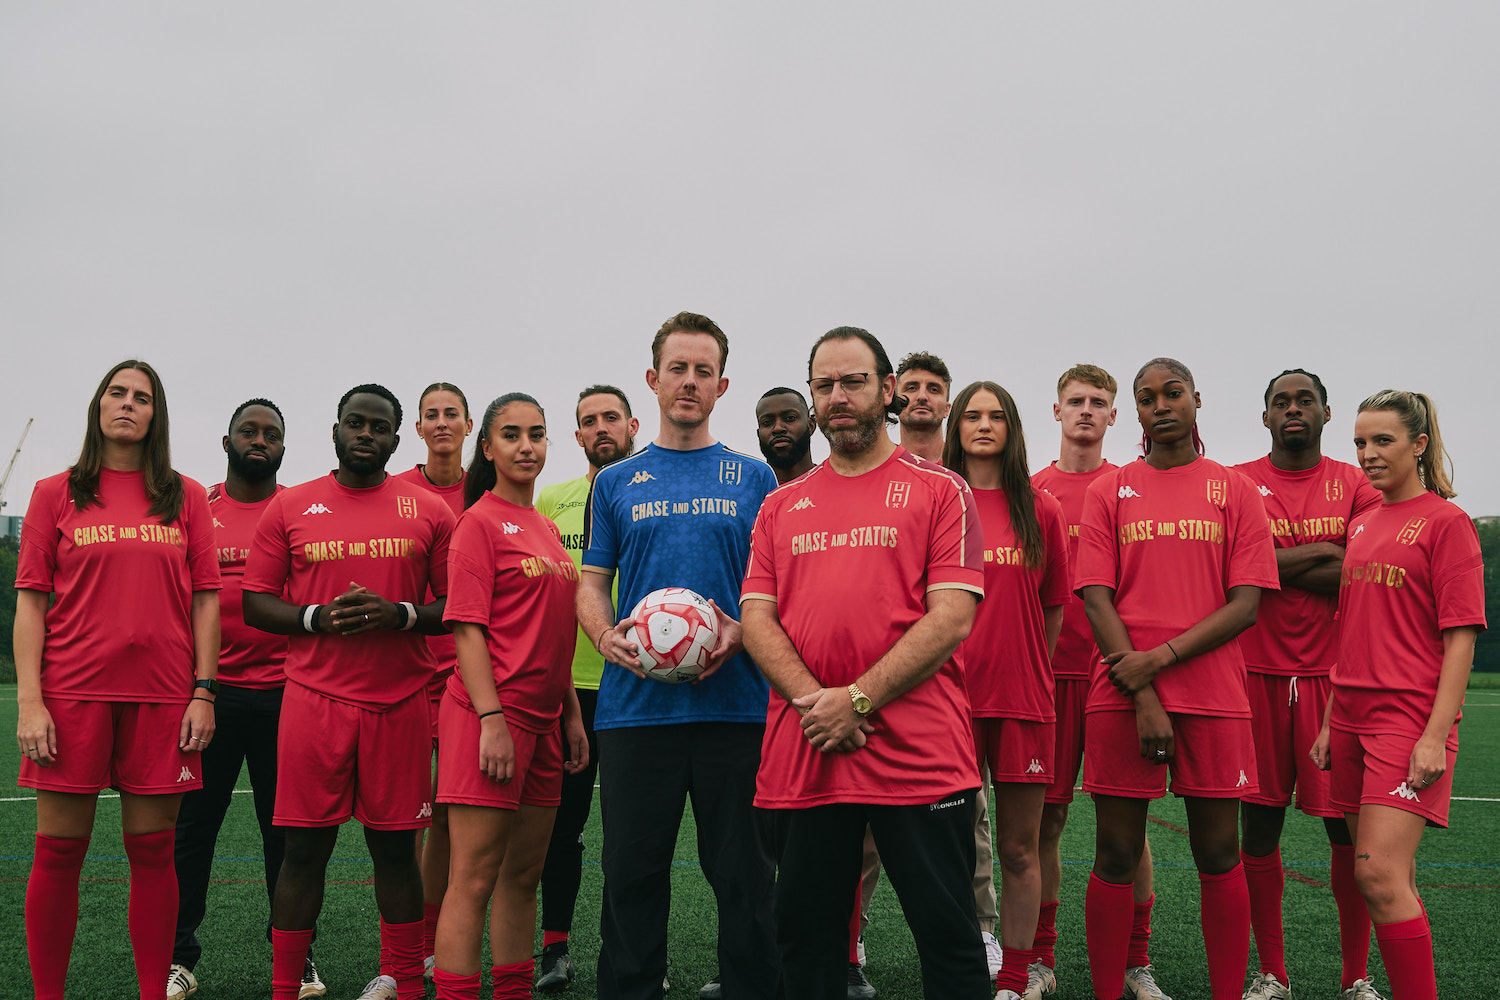 Chase & Status with players from the Hammersmith FC men and women's teams.